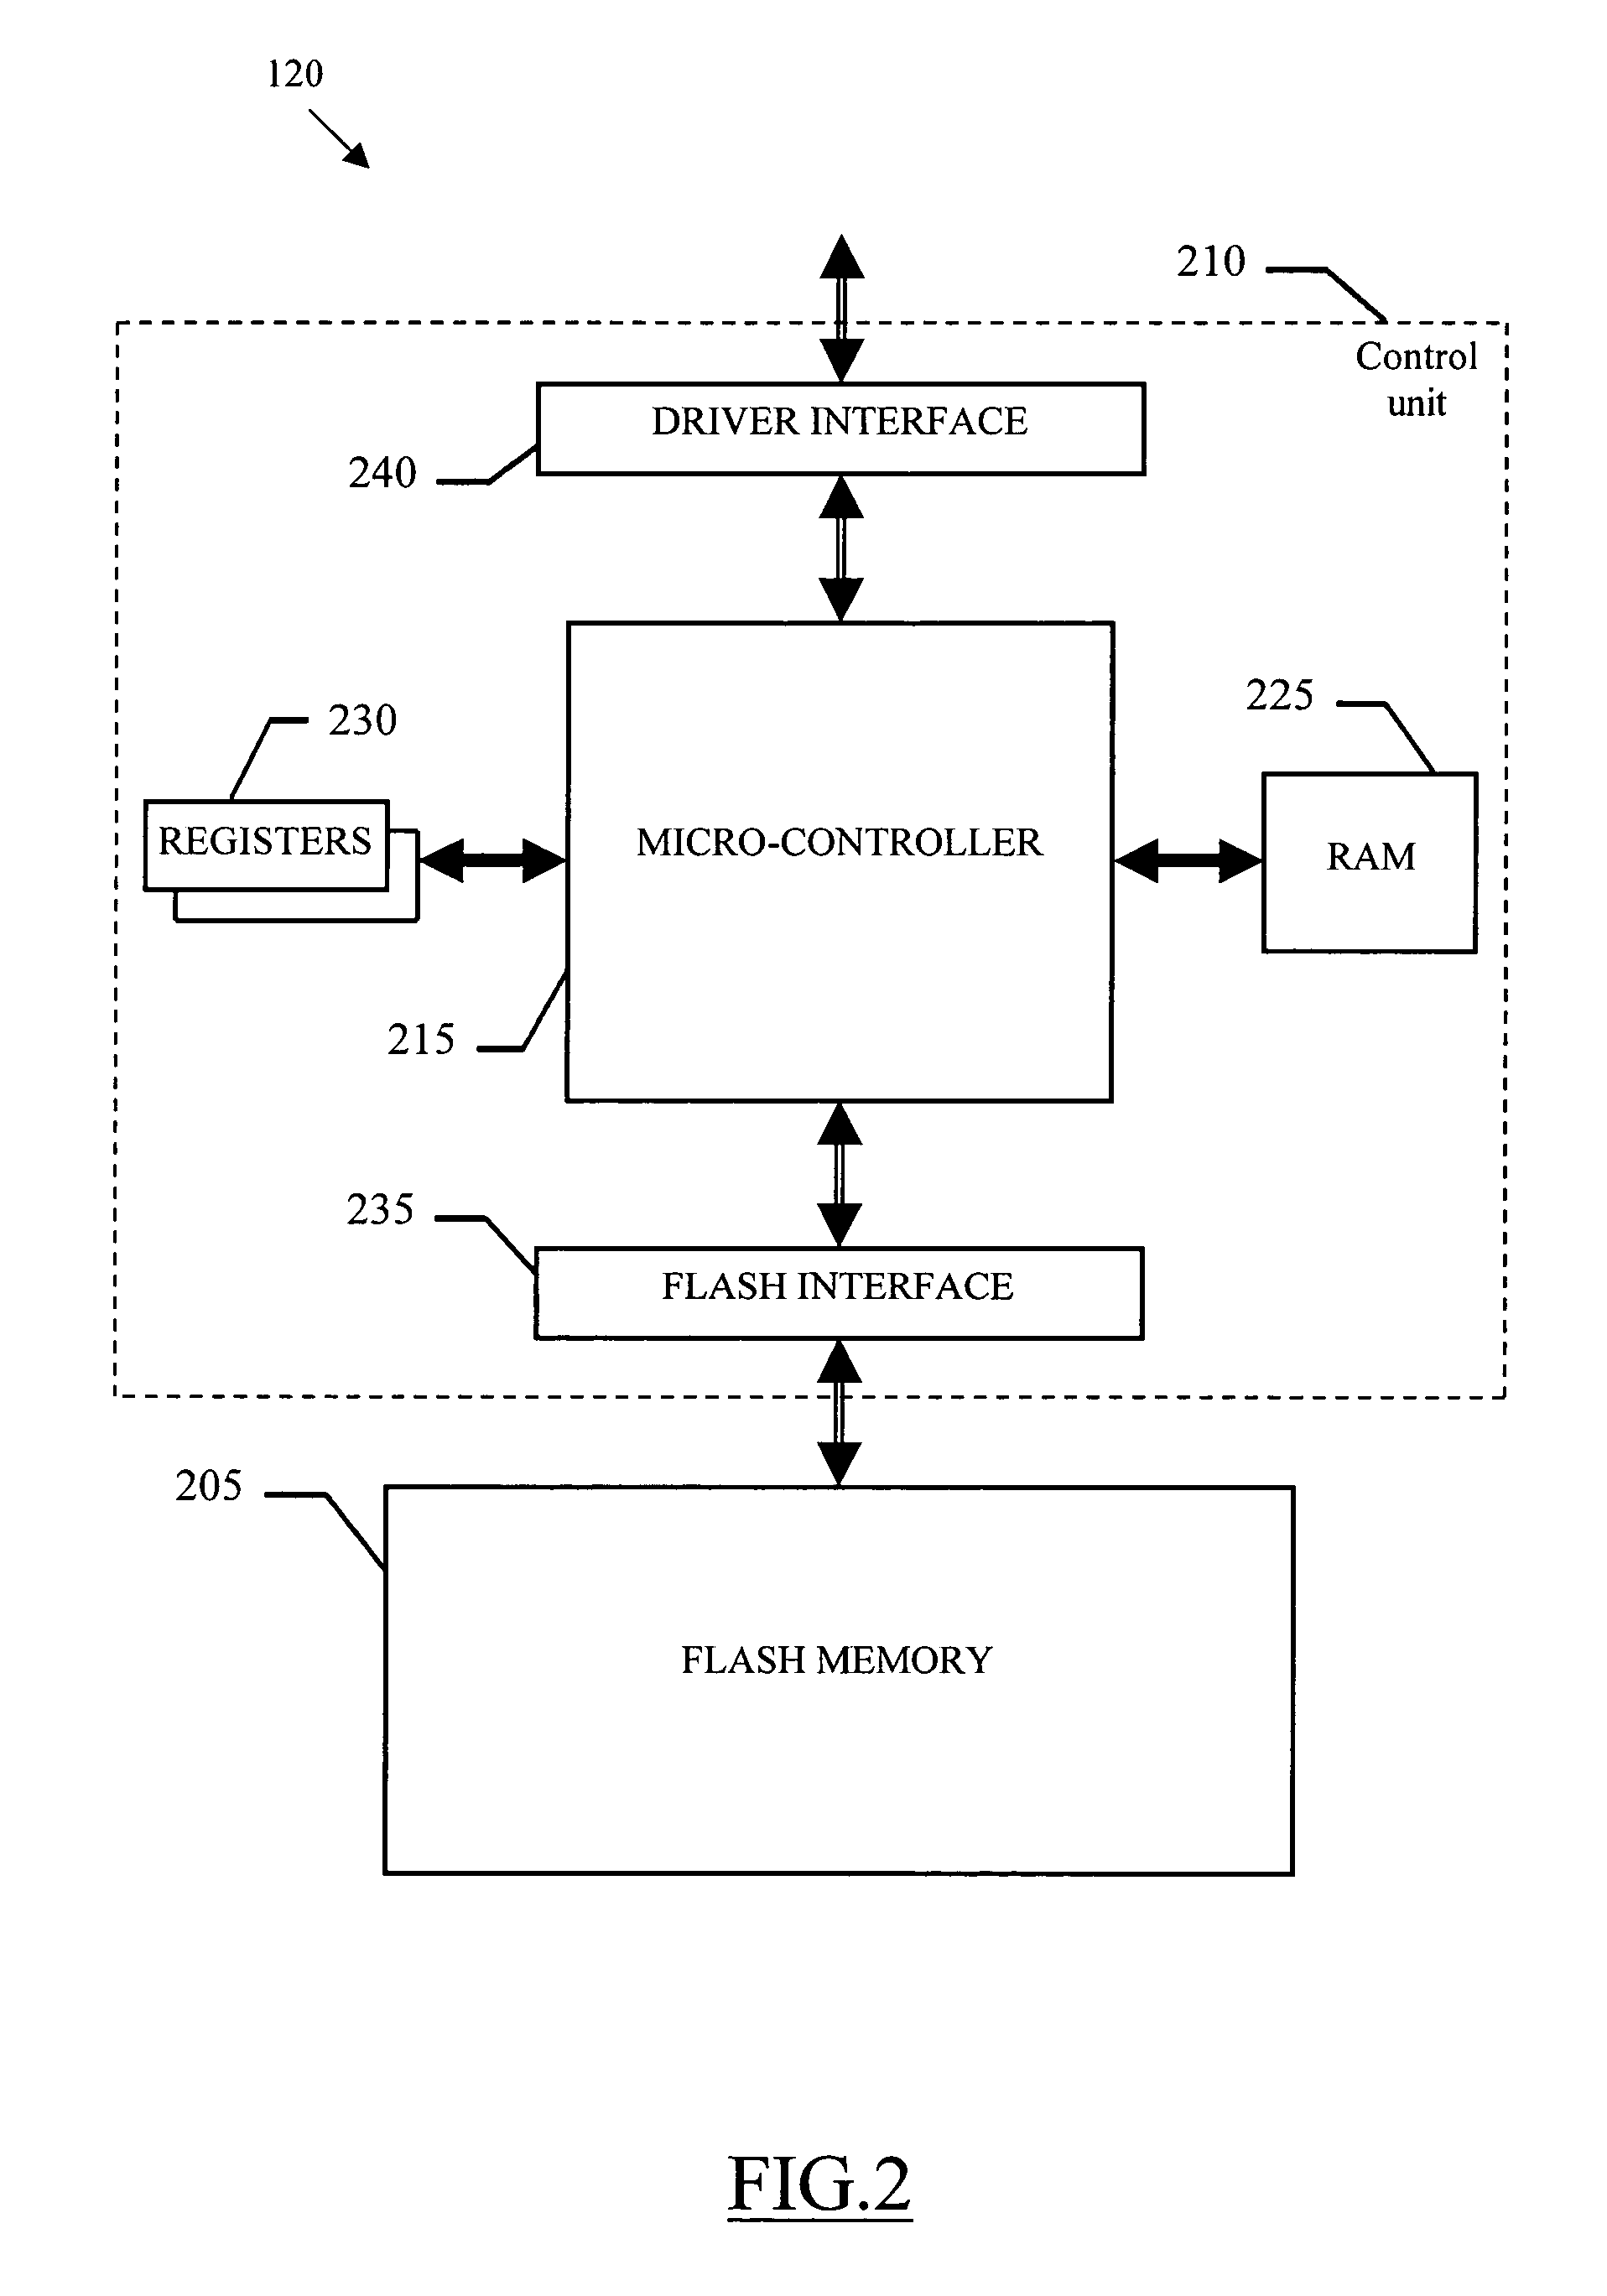 Mass memory device based on a flash memory with multiple buffers